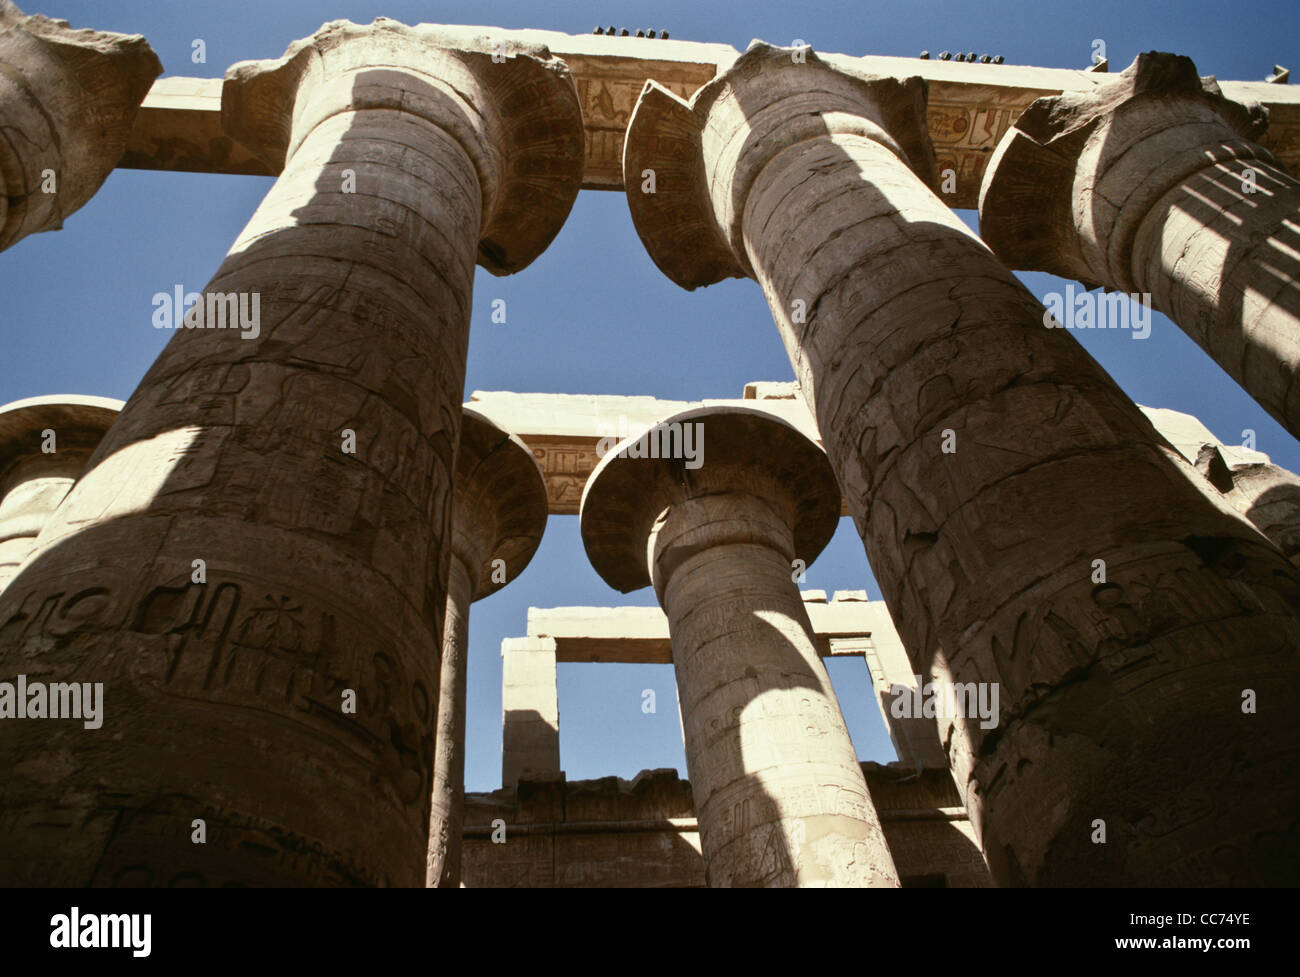 Pillars of the Great Hypostyle Hall, The Karnak Temple Complex, Egypt Stock Photo